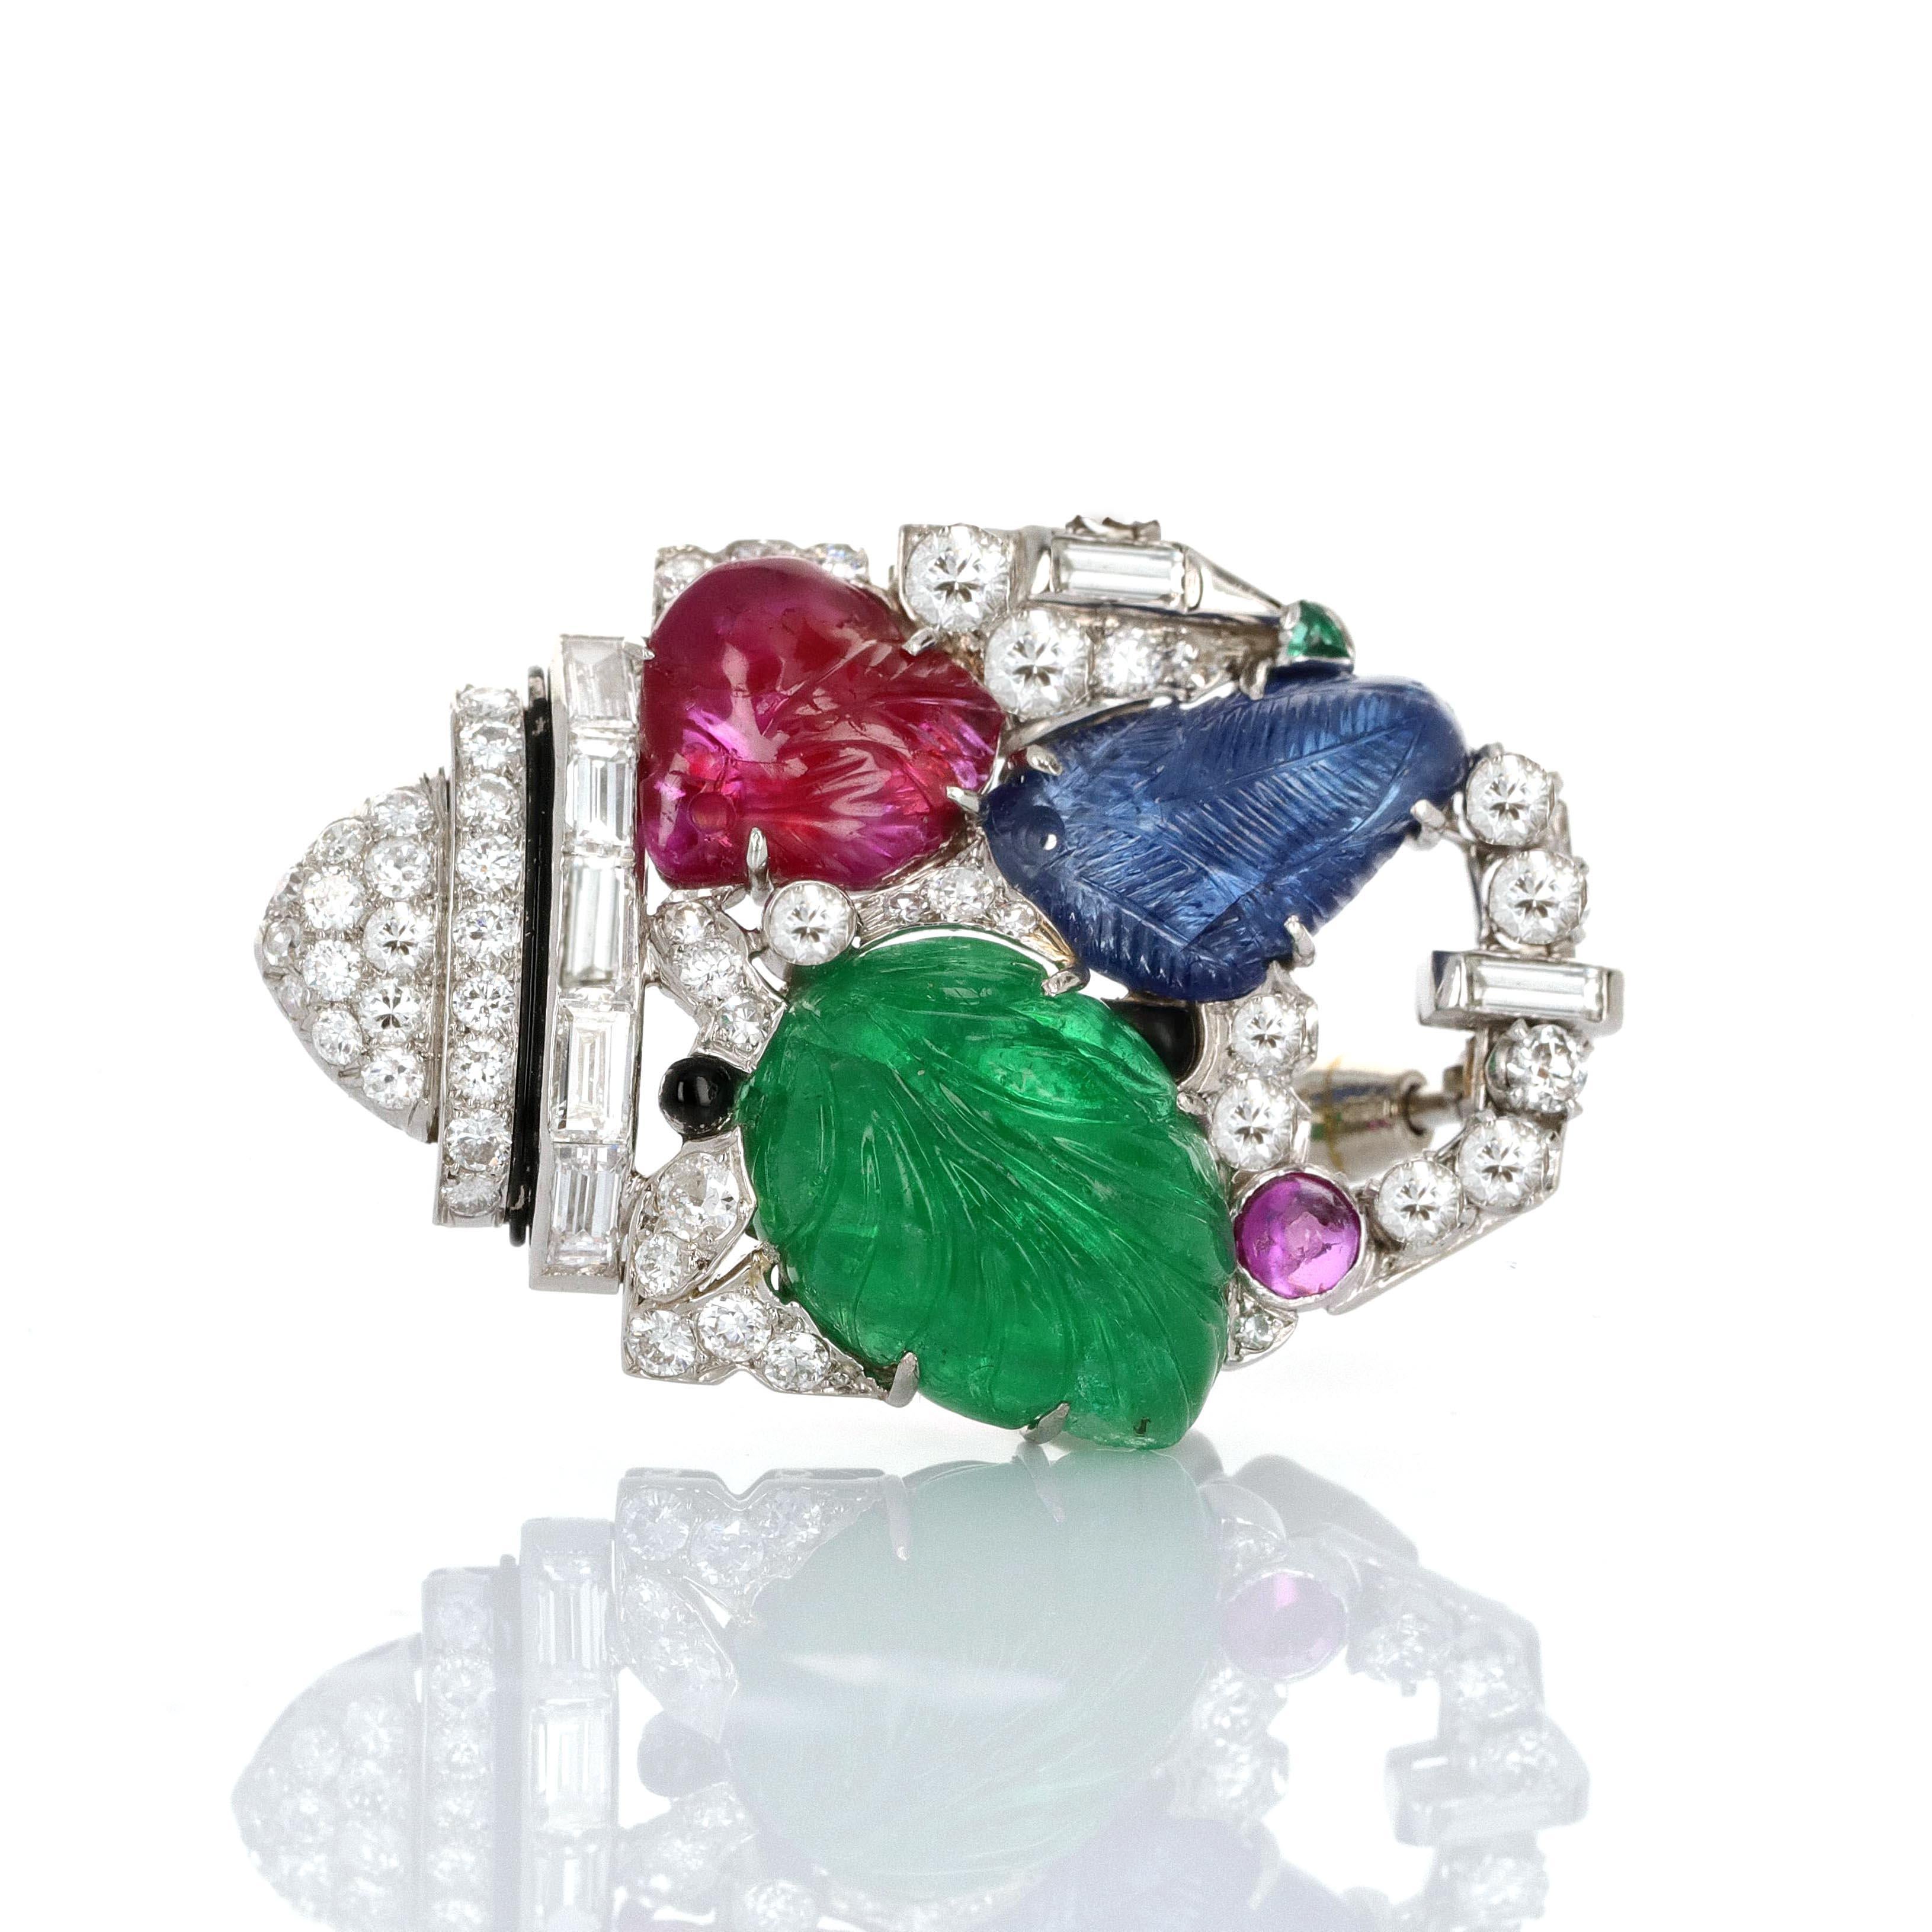 Art Deco Tutti Frutti style brooch with carved Ruby, Sapphire, Emerald, and Diamond made in platinum. There are 1.25 carats total weight in round brilliant diamonds and 0.50 carats in baguette shaped diamonds. Tutti frutti style, ruby, emerald,